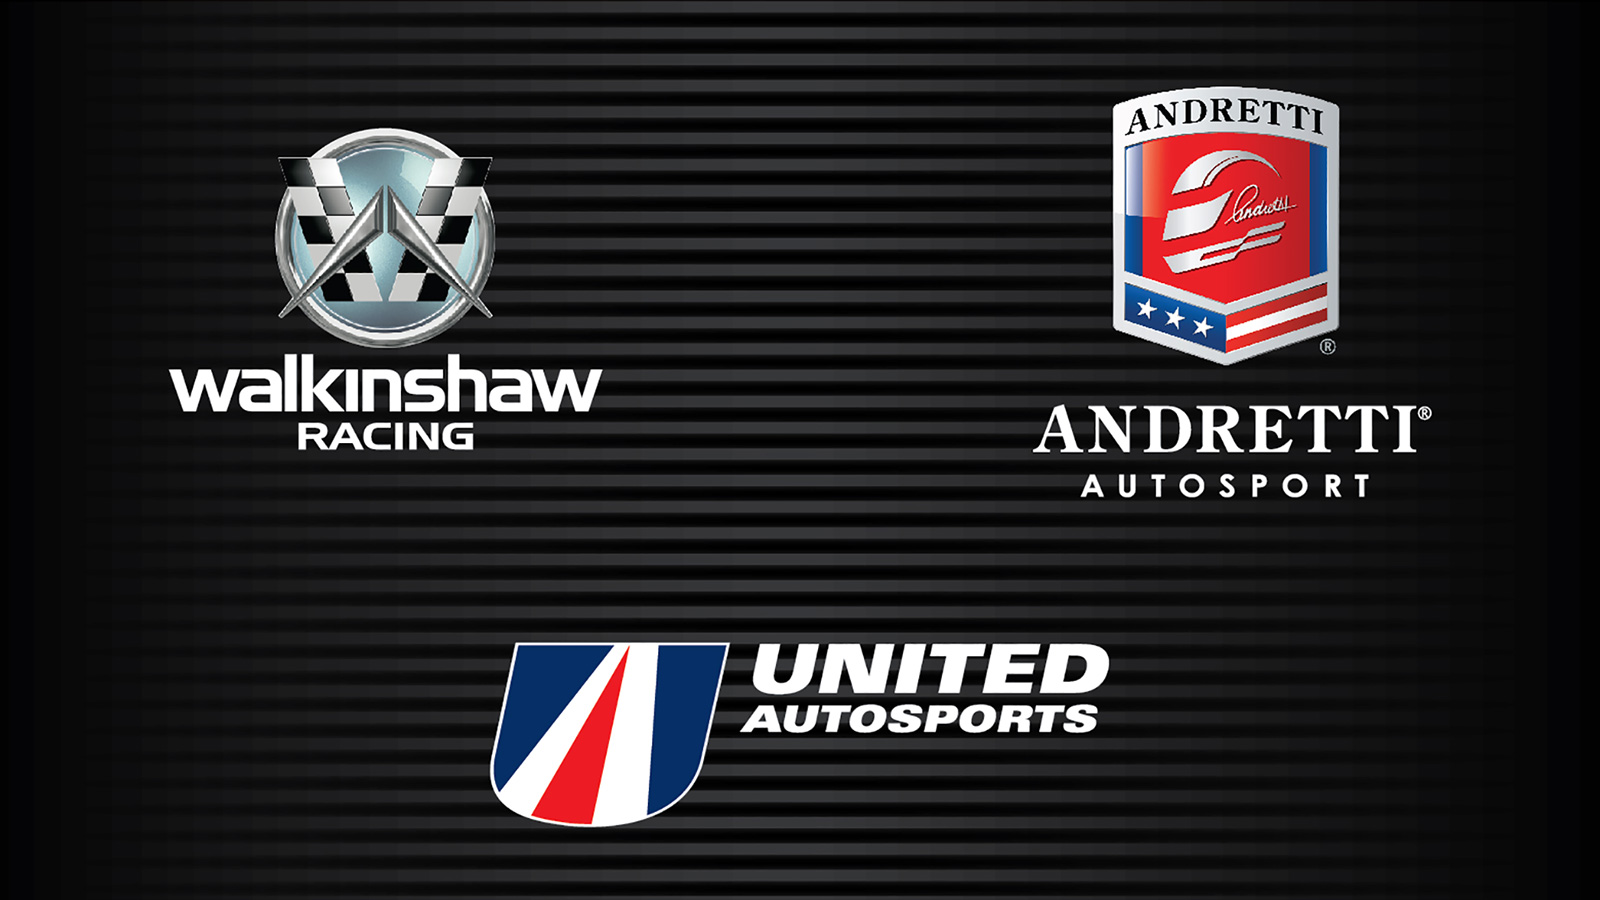 Walkinshaw Andretti United will be effective of 2018.